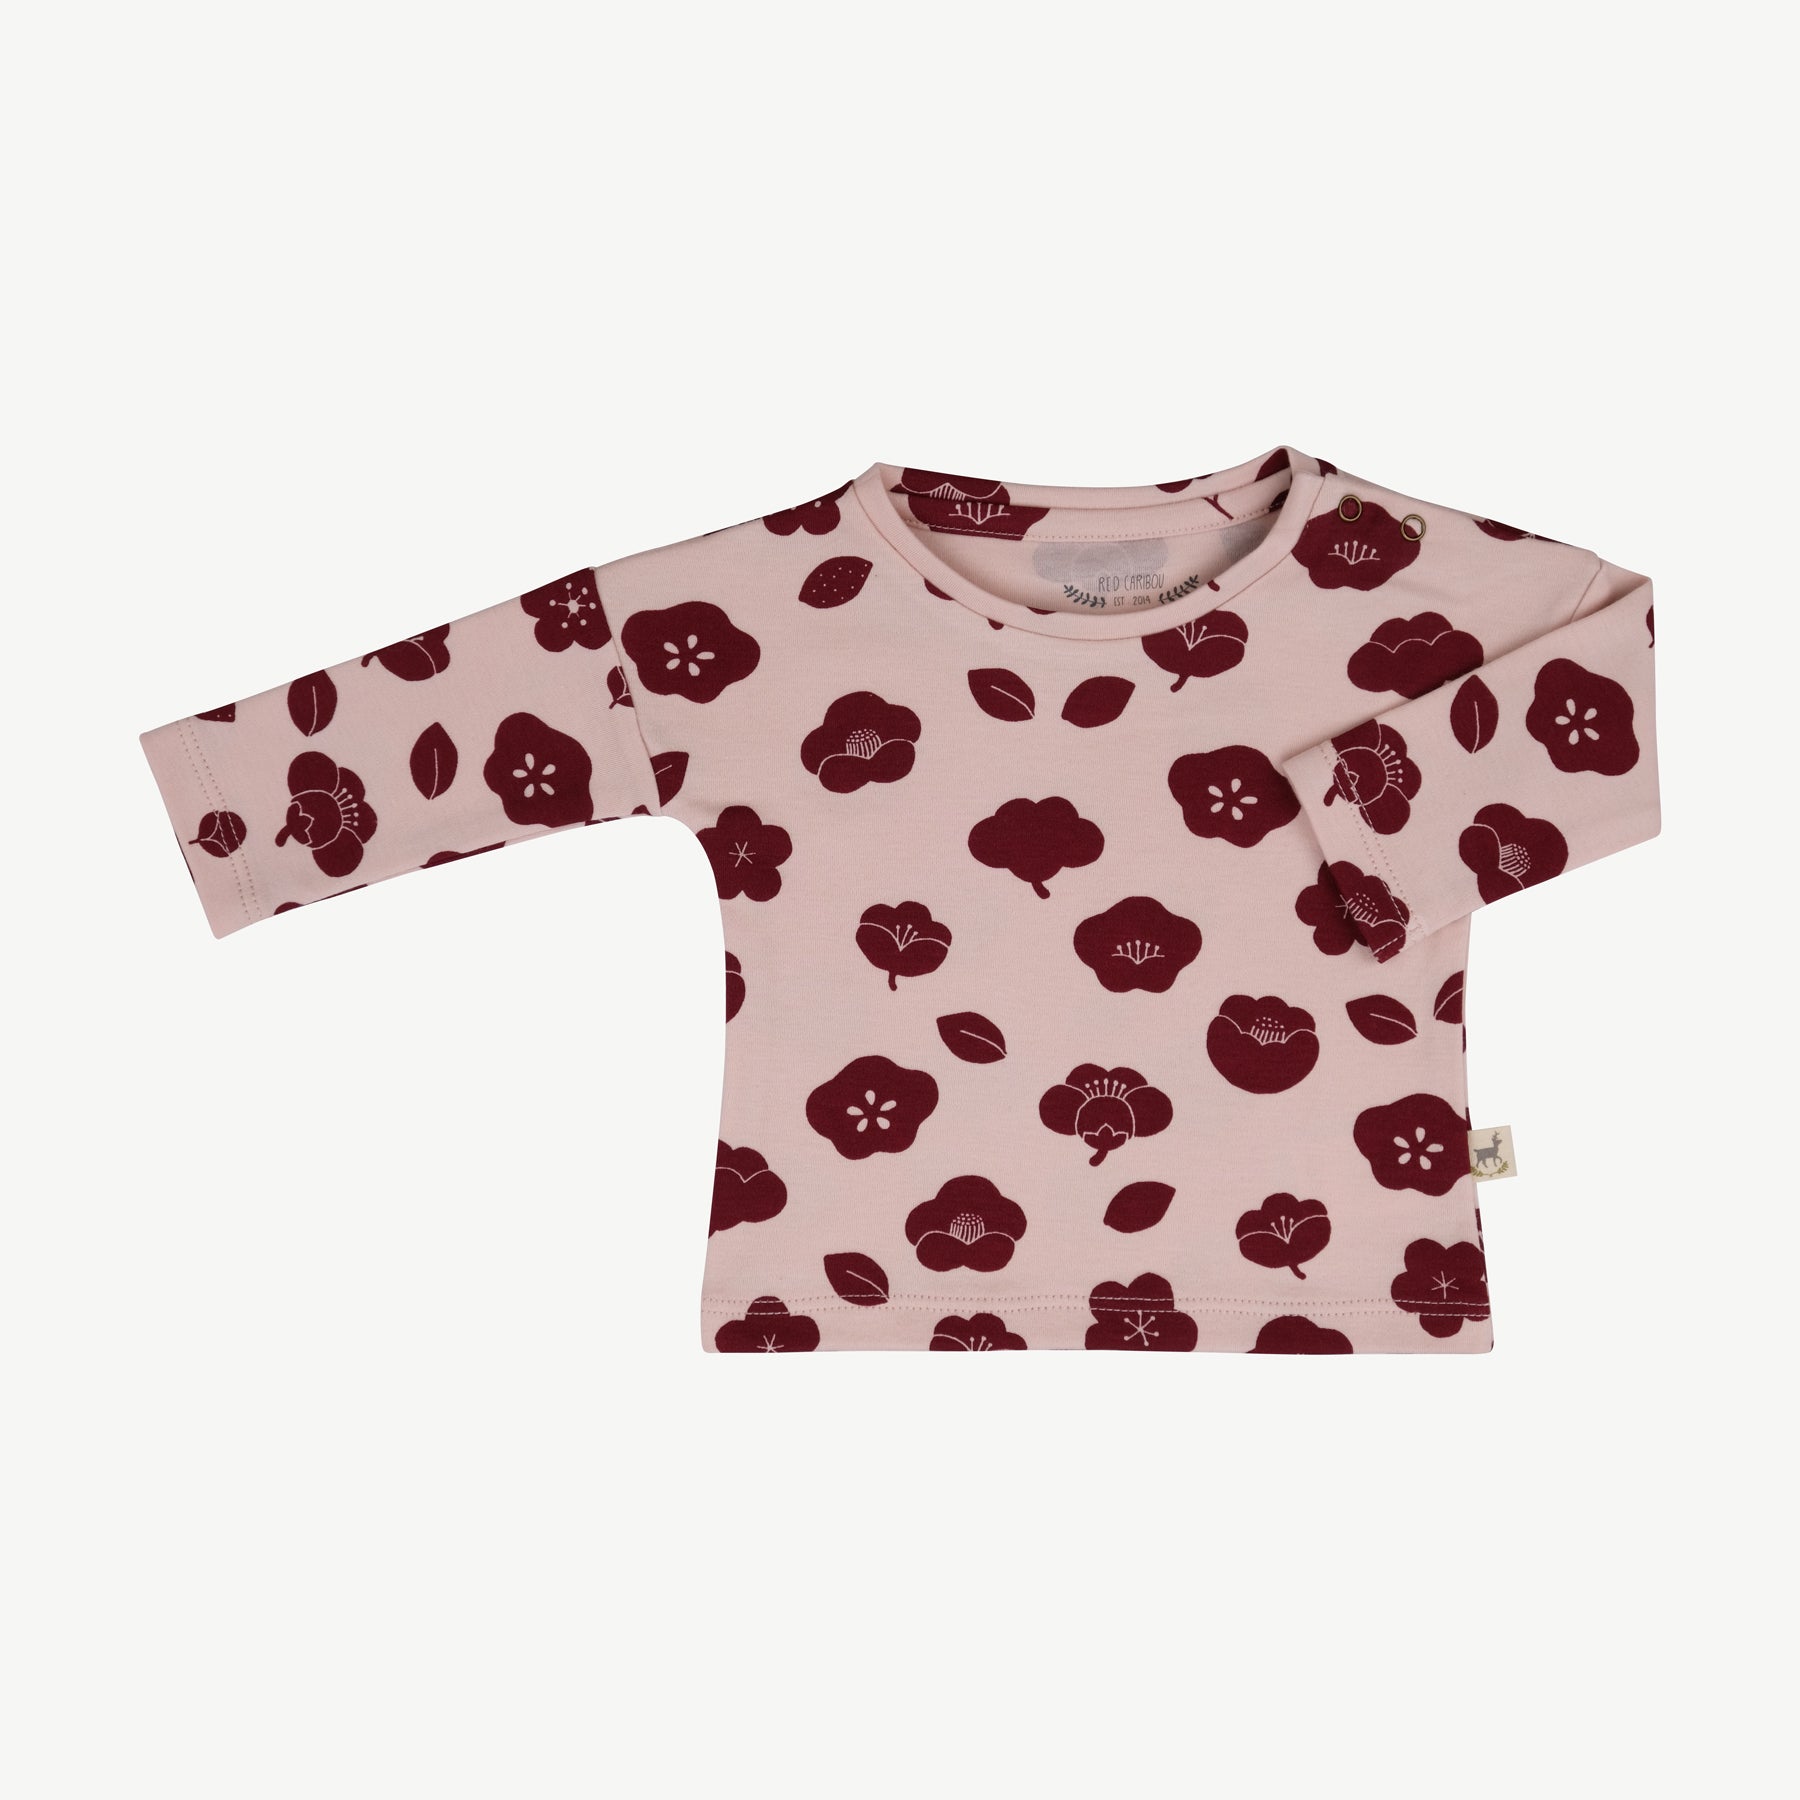 'plums in bloom' peach whip t-shirt